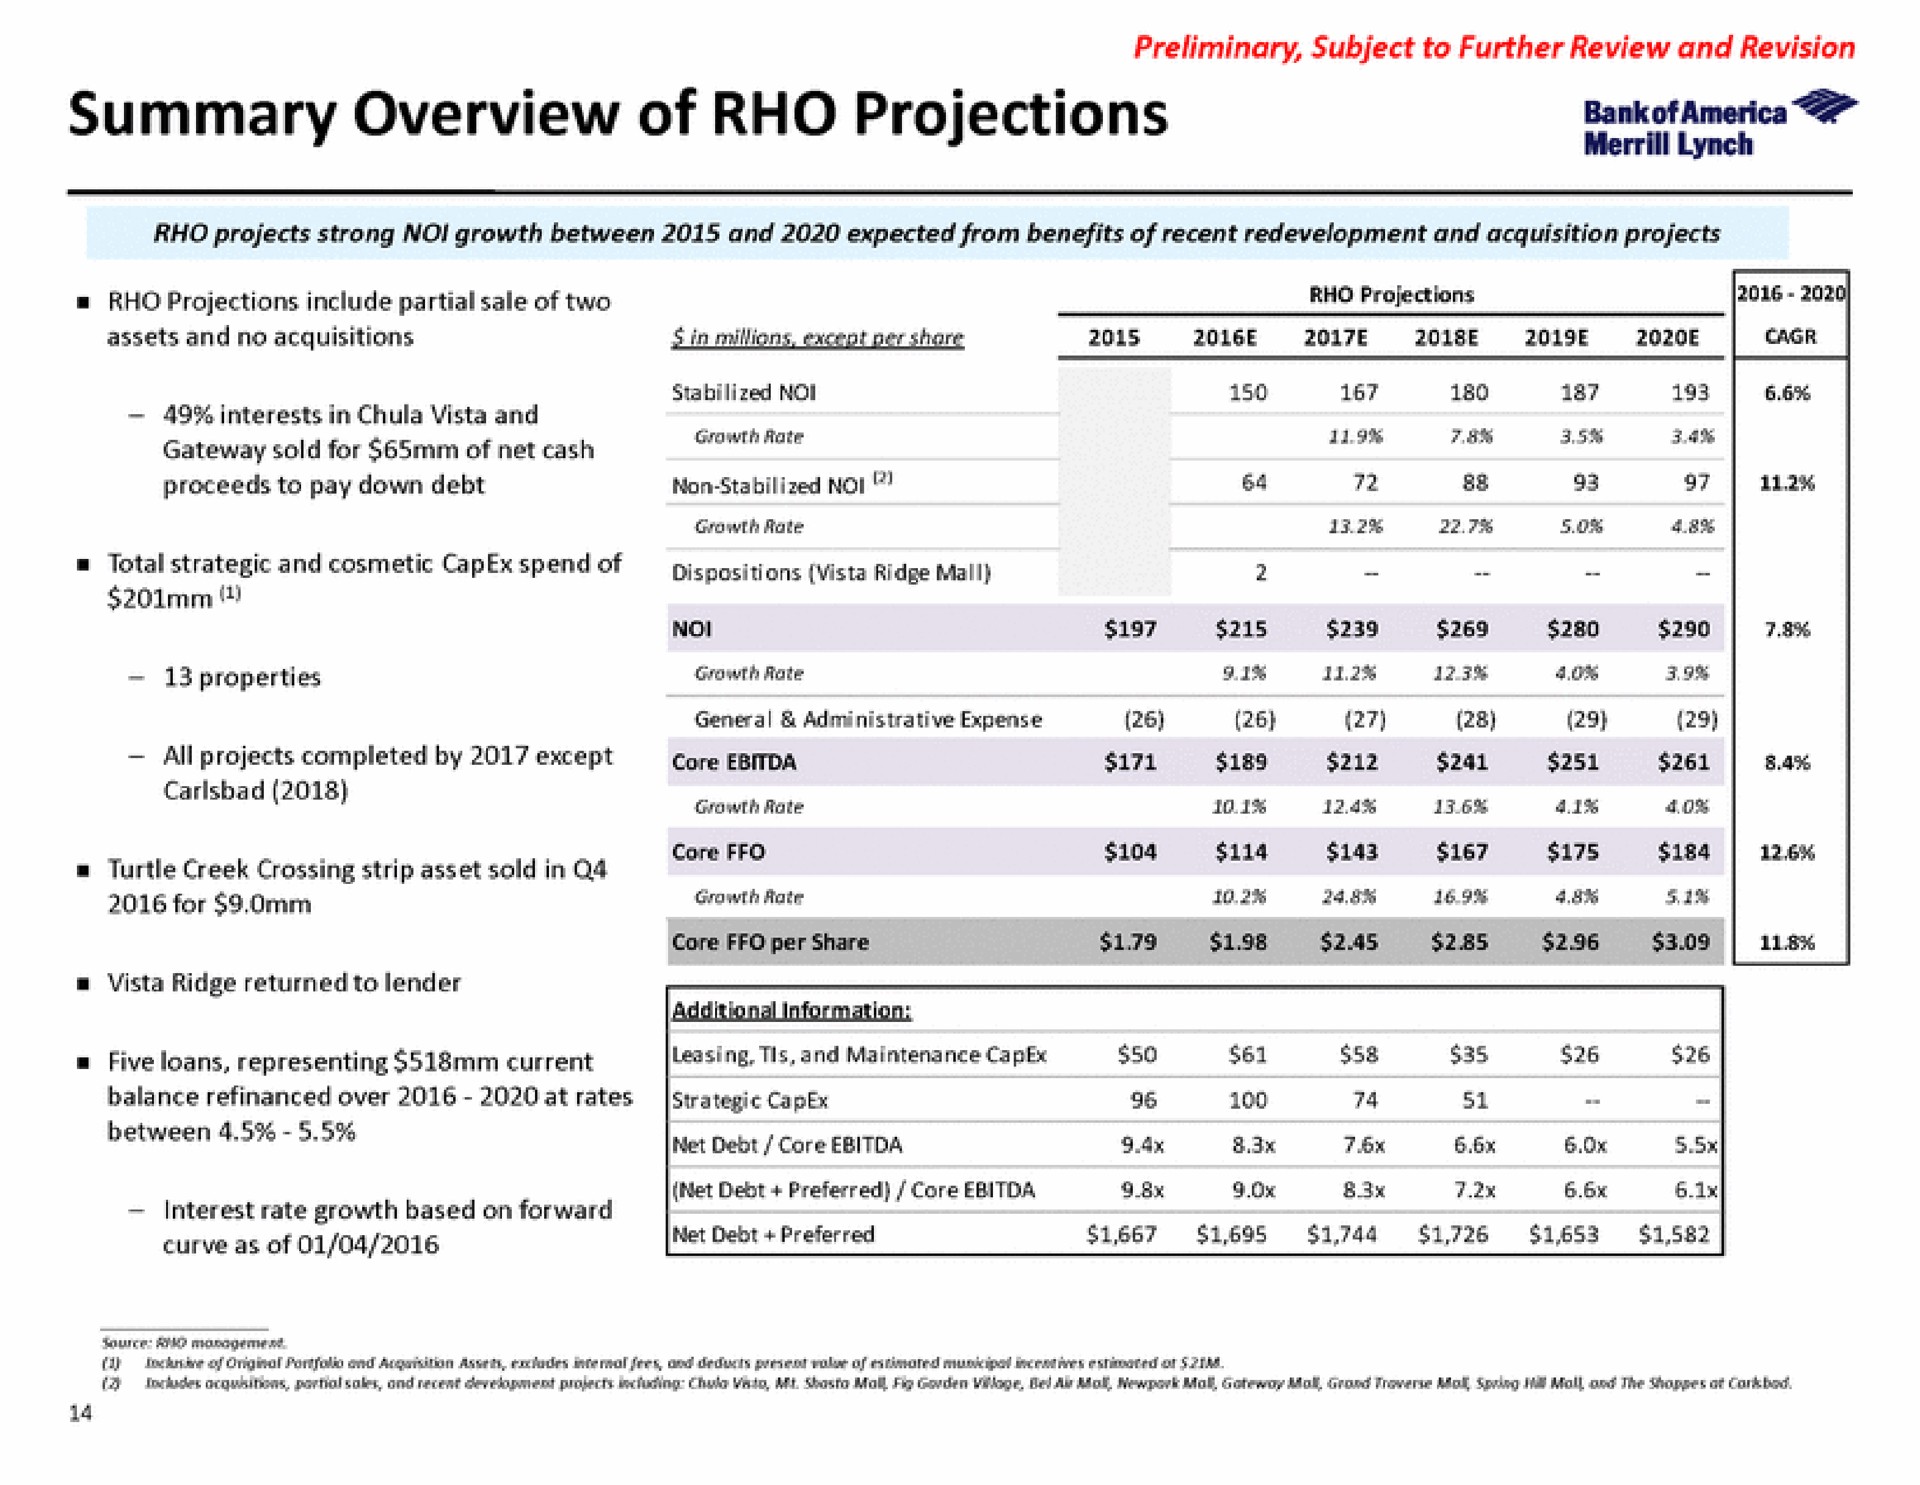 summary overview of rho projections lynch | Bank of America